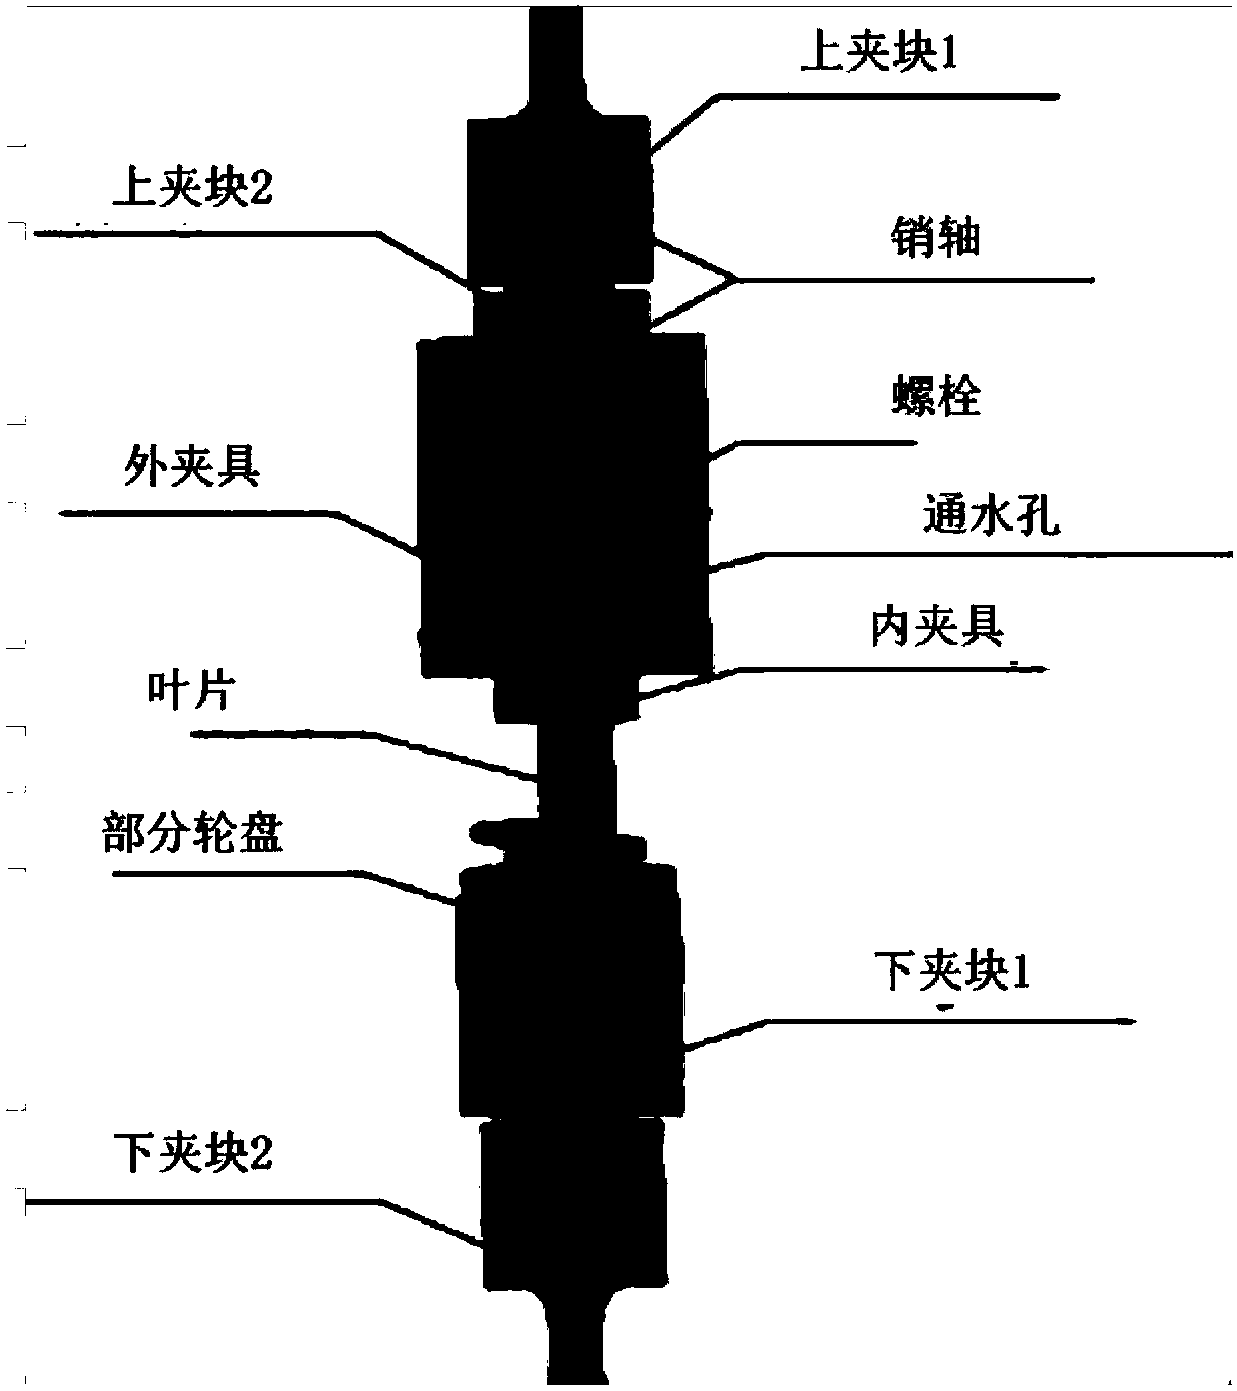 High-low cycle complex fatigue test clamp for mortise-joint structure of small blade of turbine